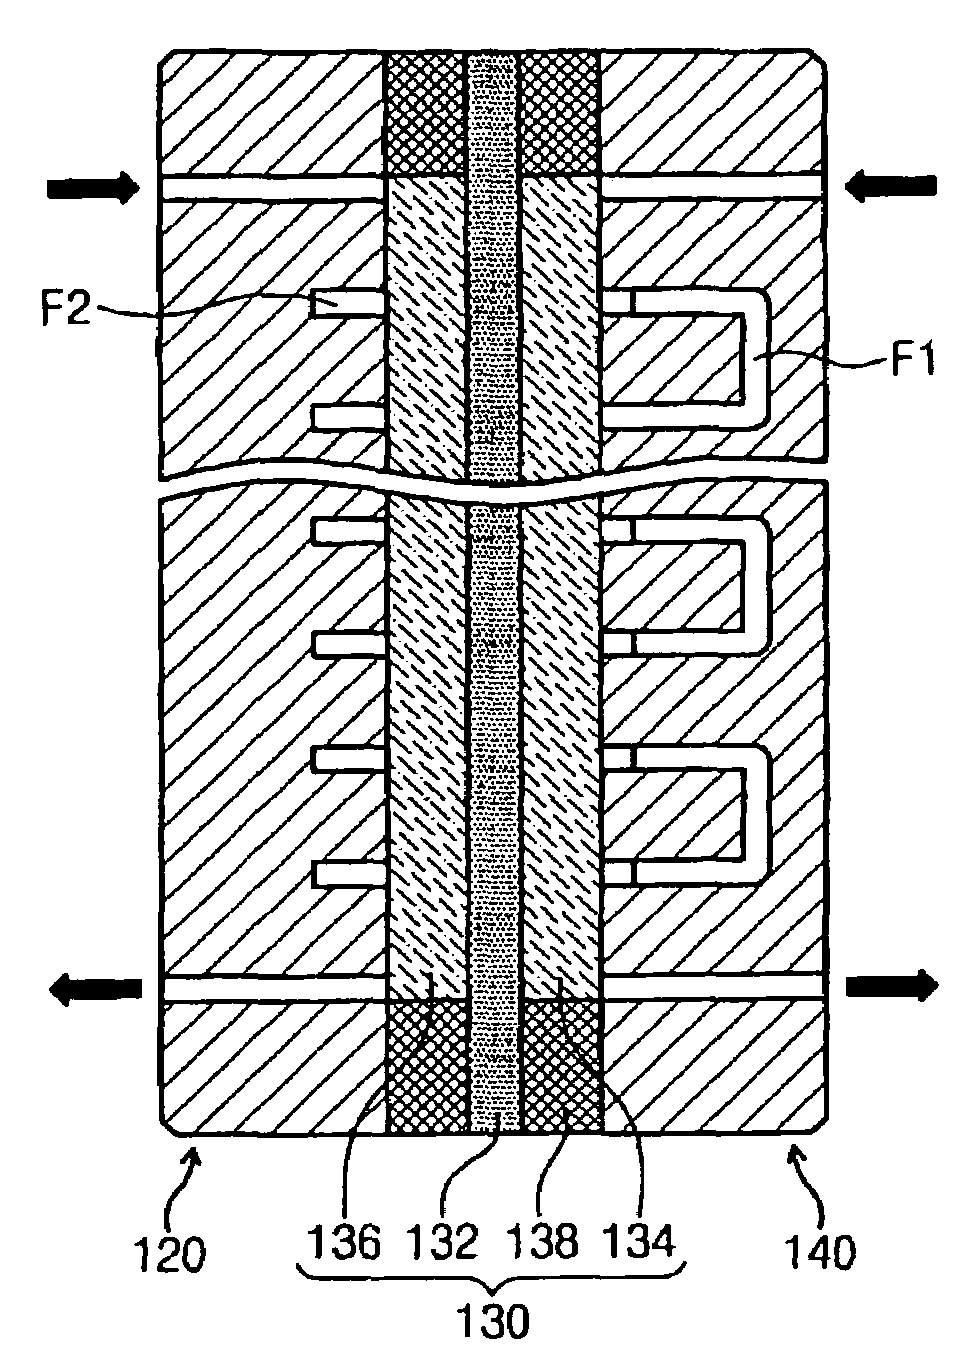 Toroidal probe unit for nuclear magnetic resonance